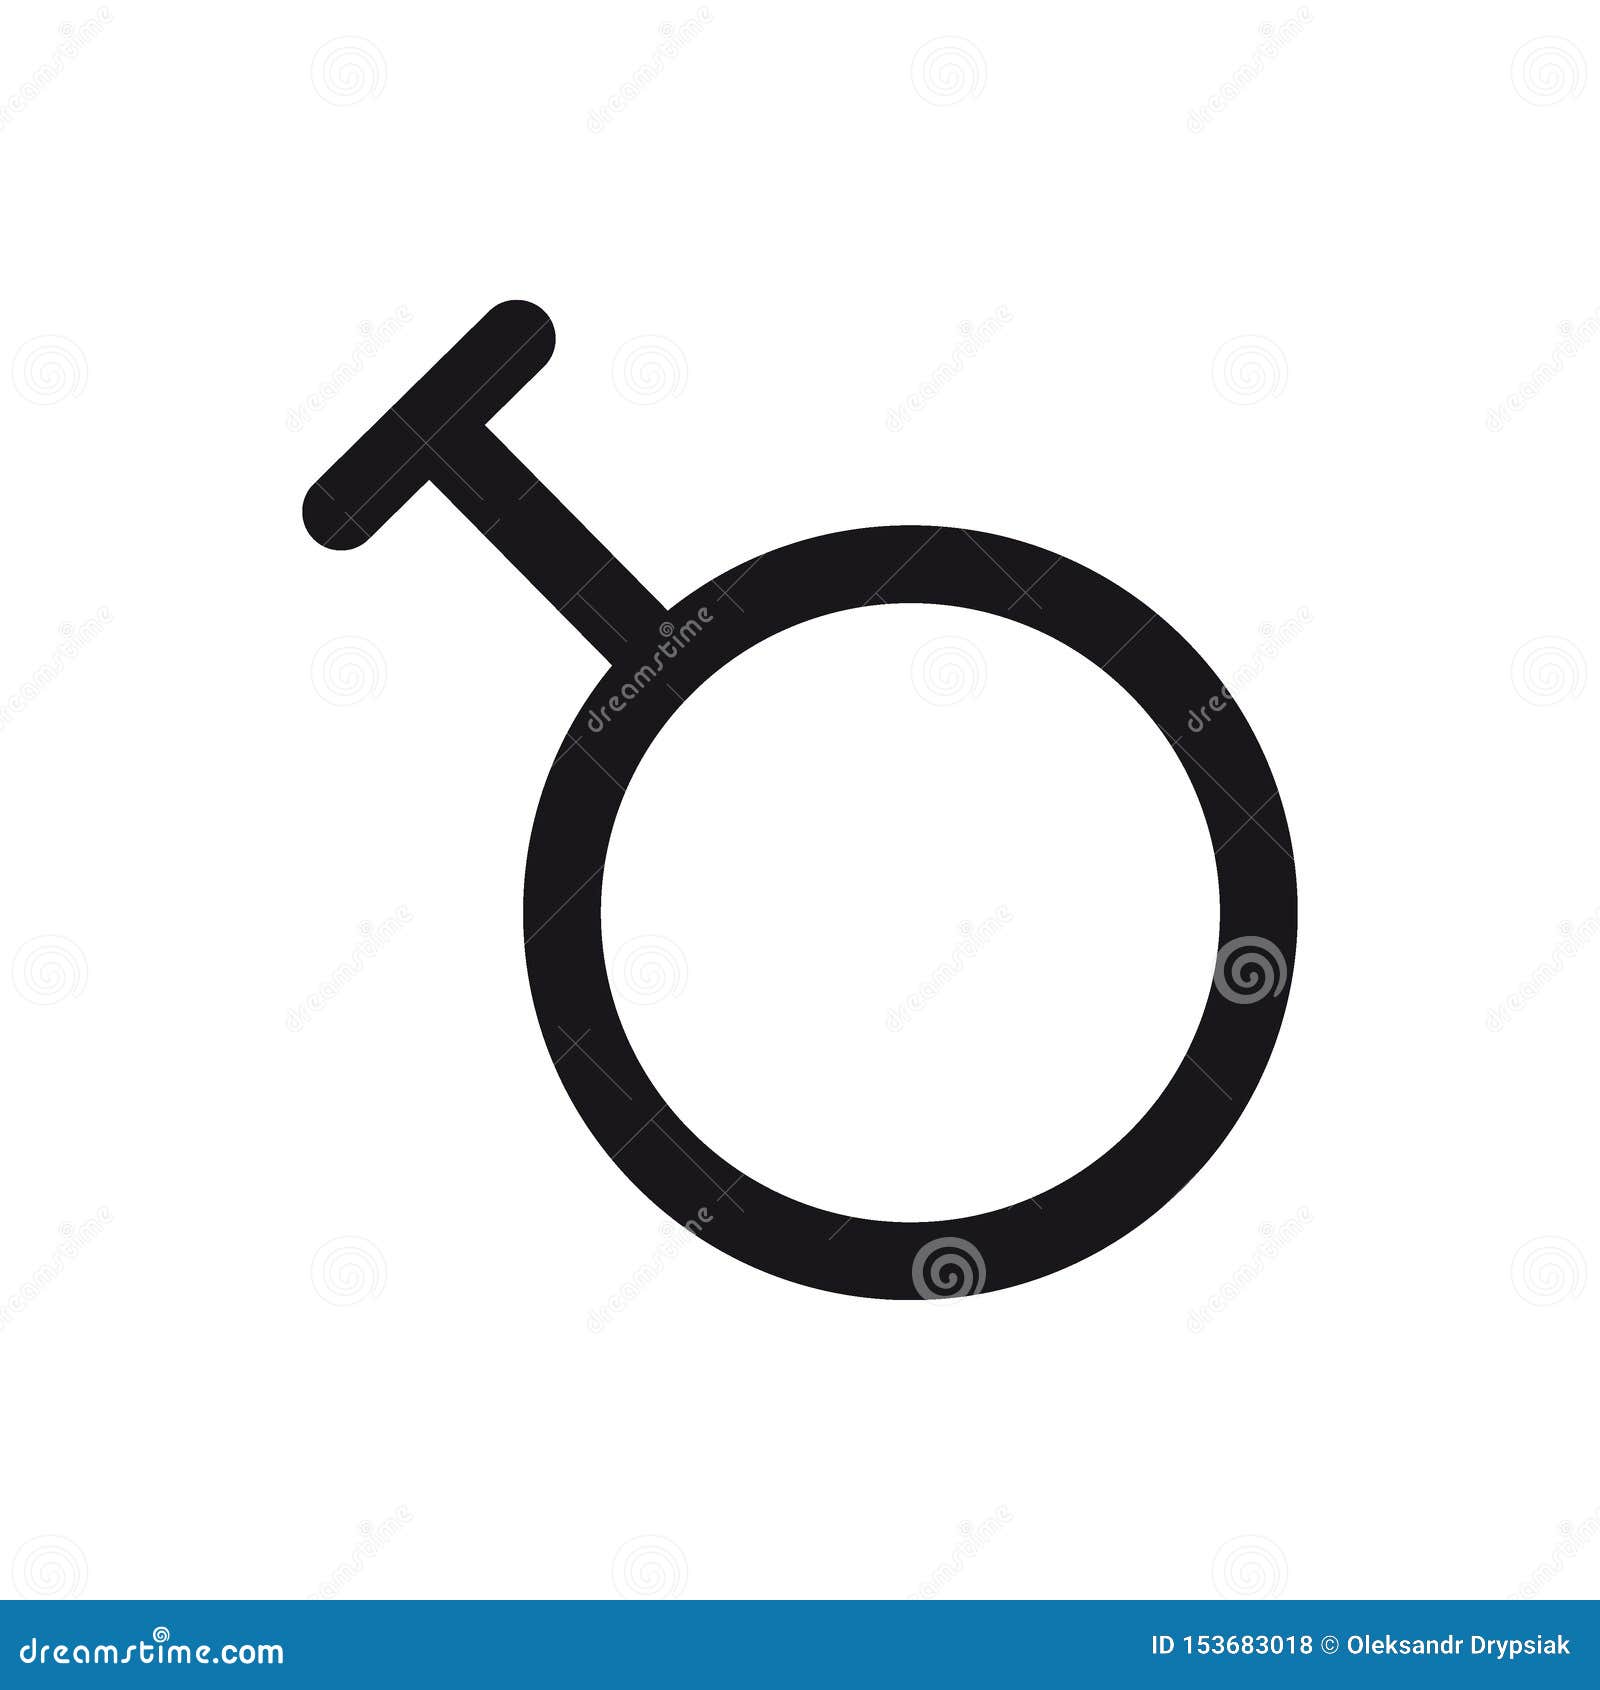 travesti . gender and sexual orientation icon or sign concept.